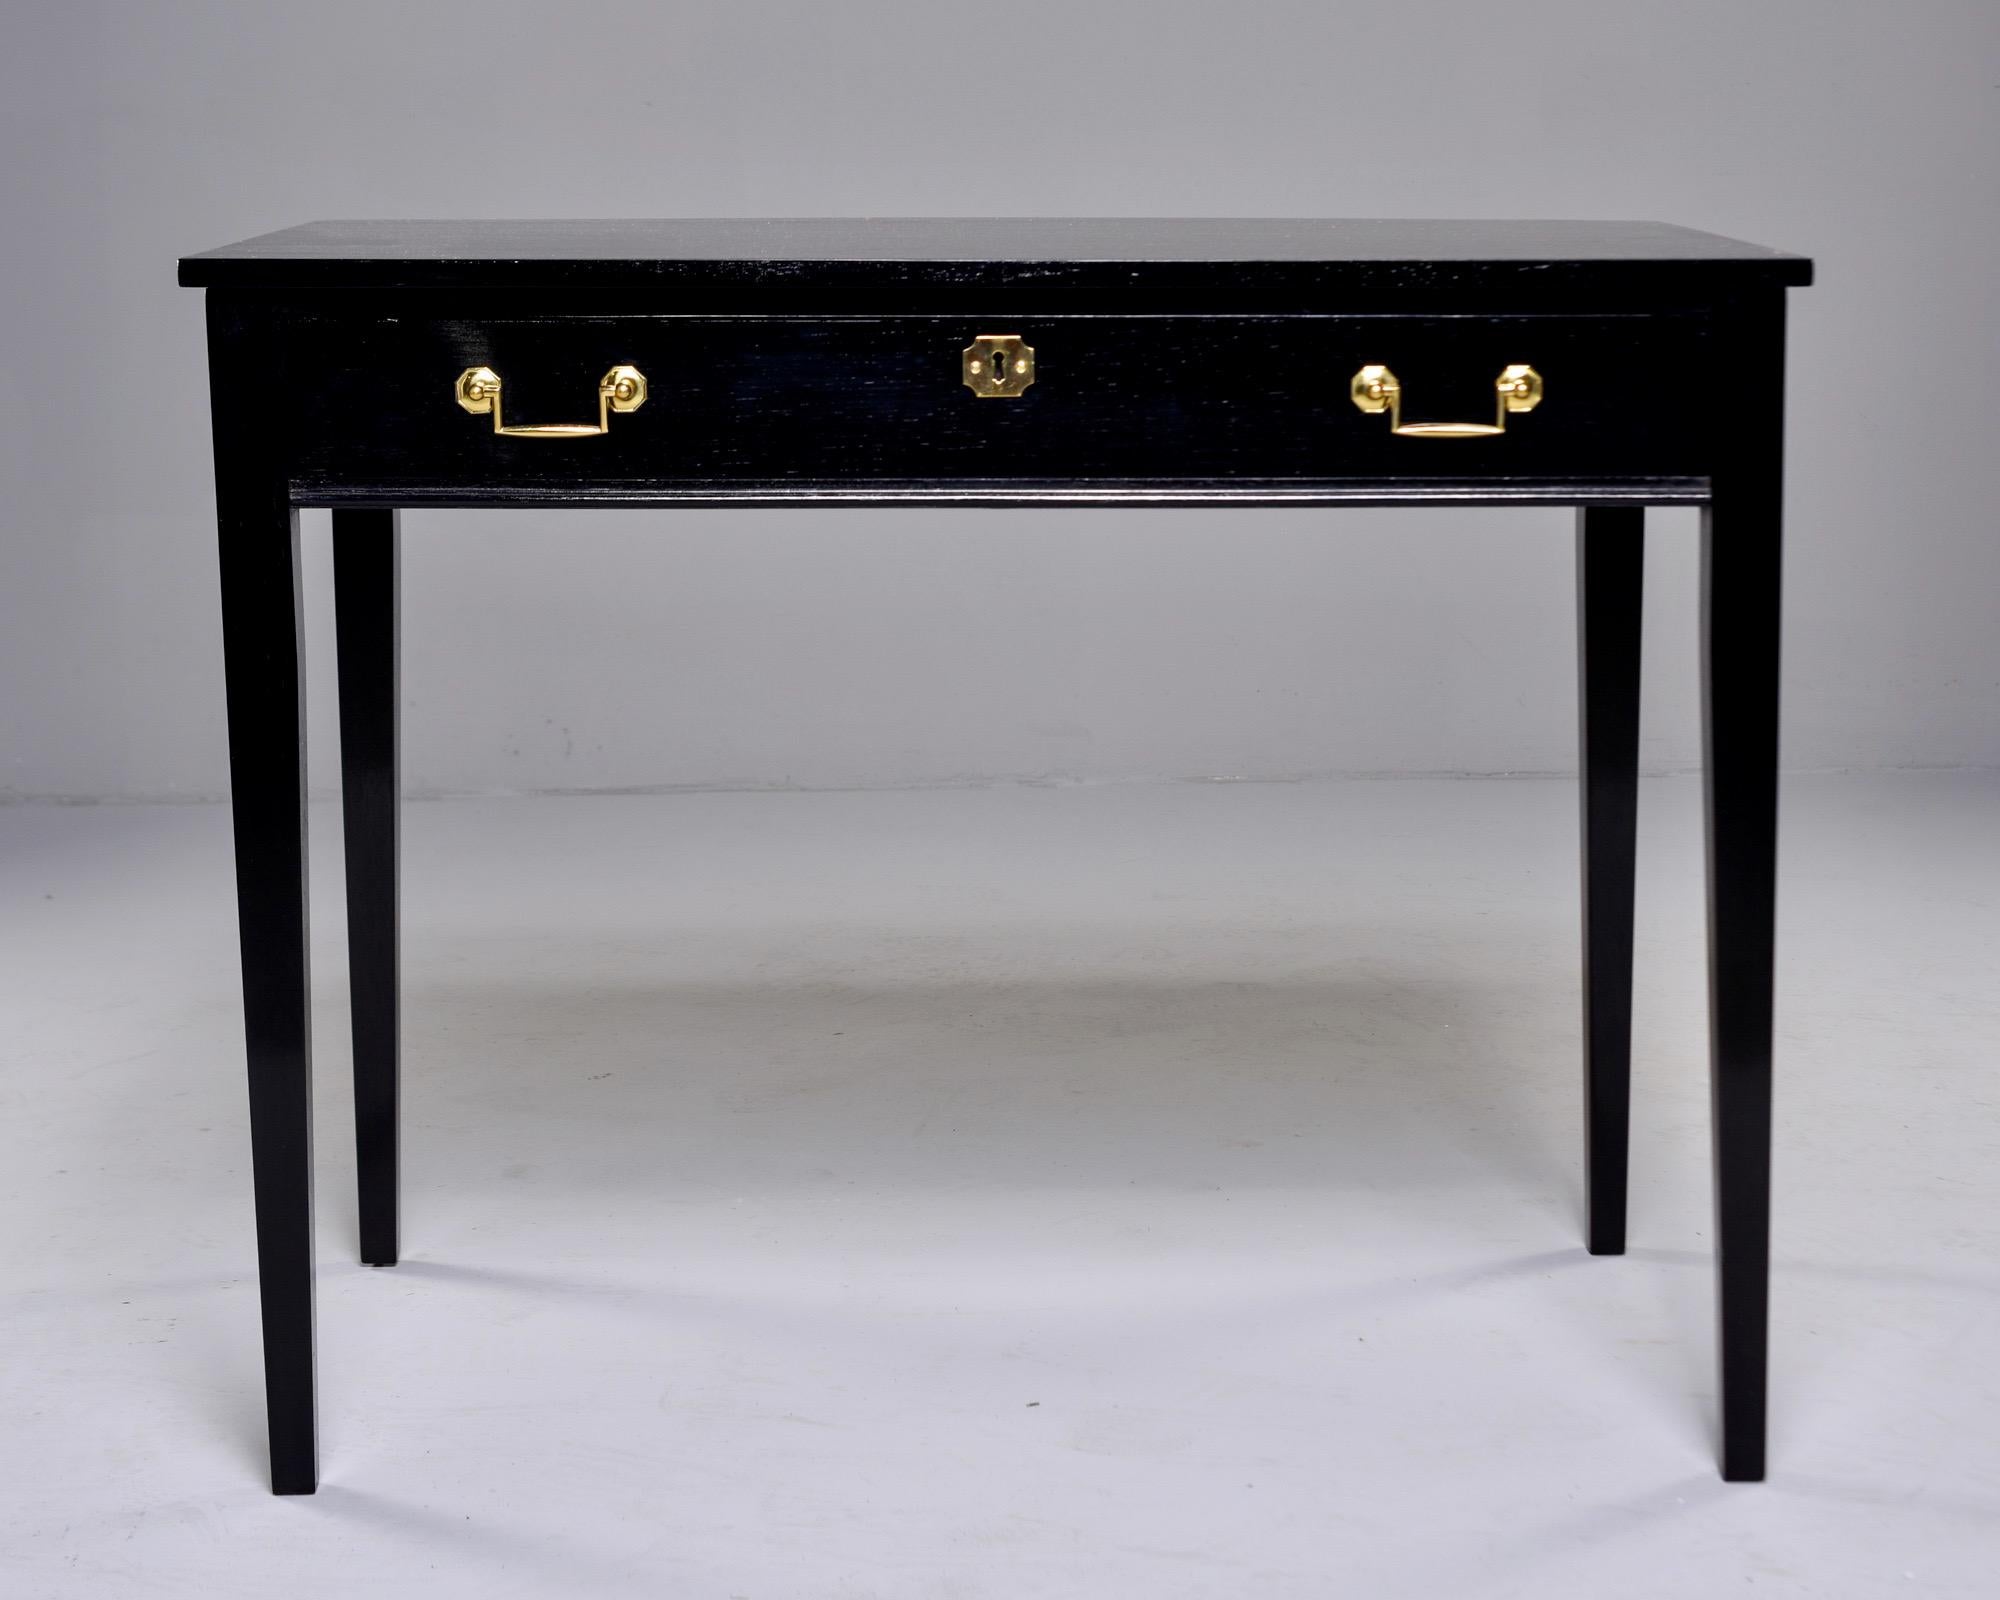 Circa 1900s pair of English writing desks with single locking center drawer and newly ebonised finish. Can be used as consoles or side tables. Sold and priced as a pair.